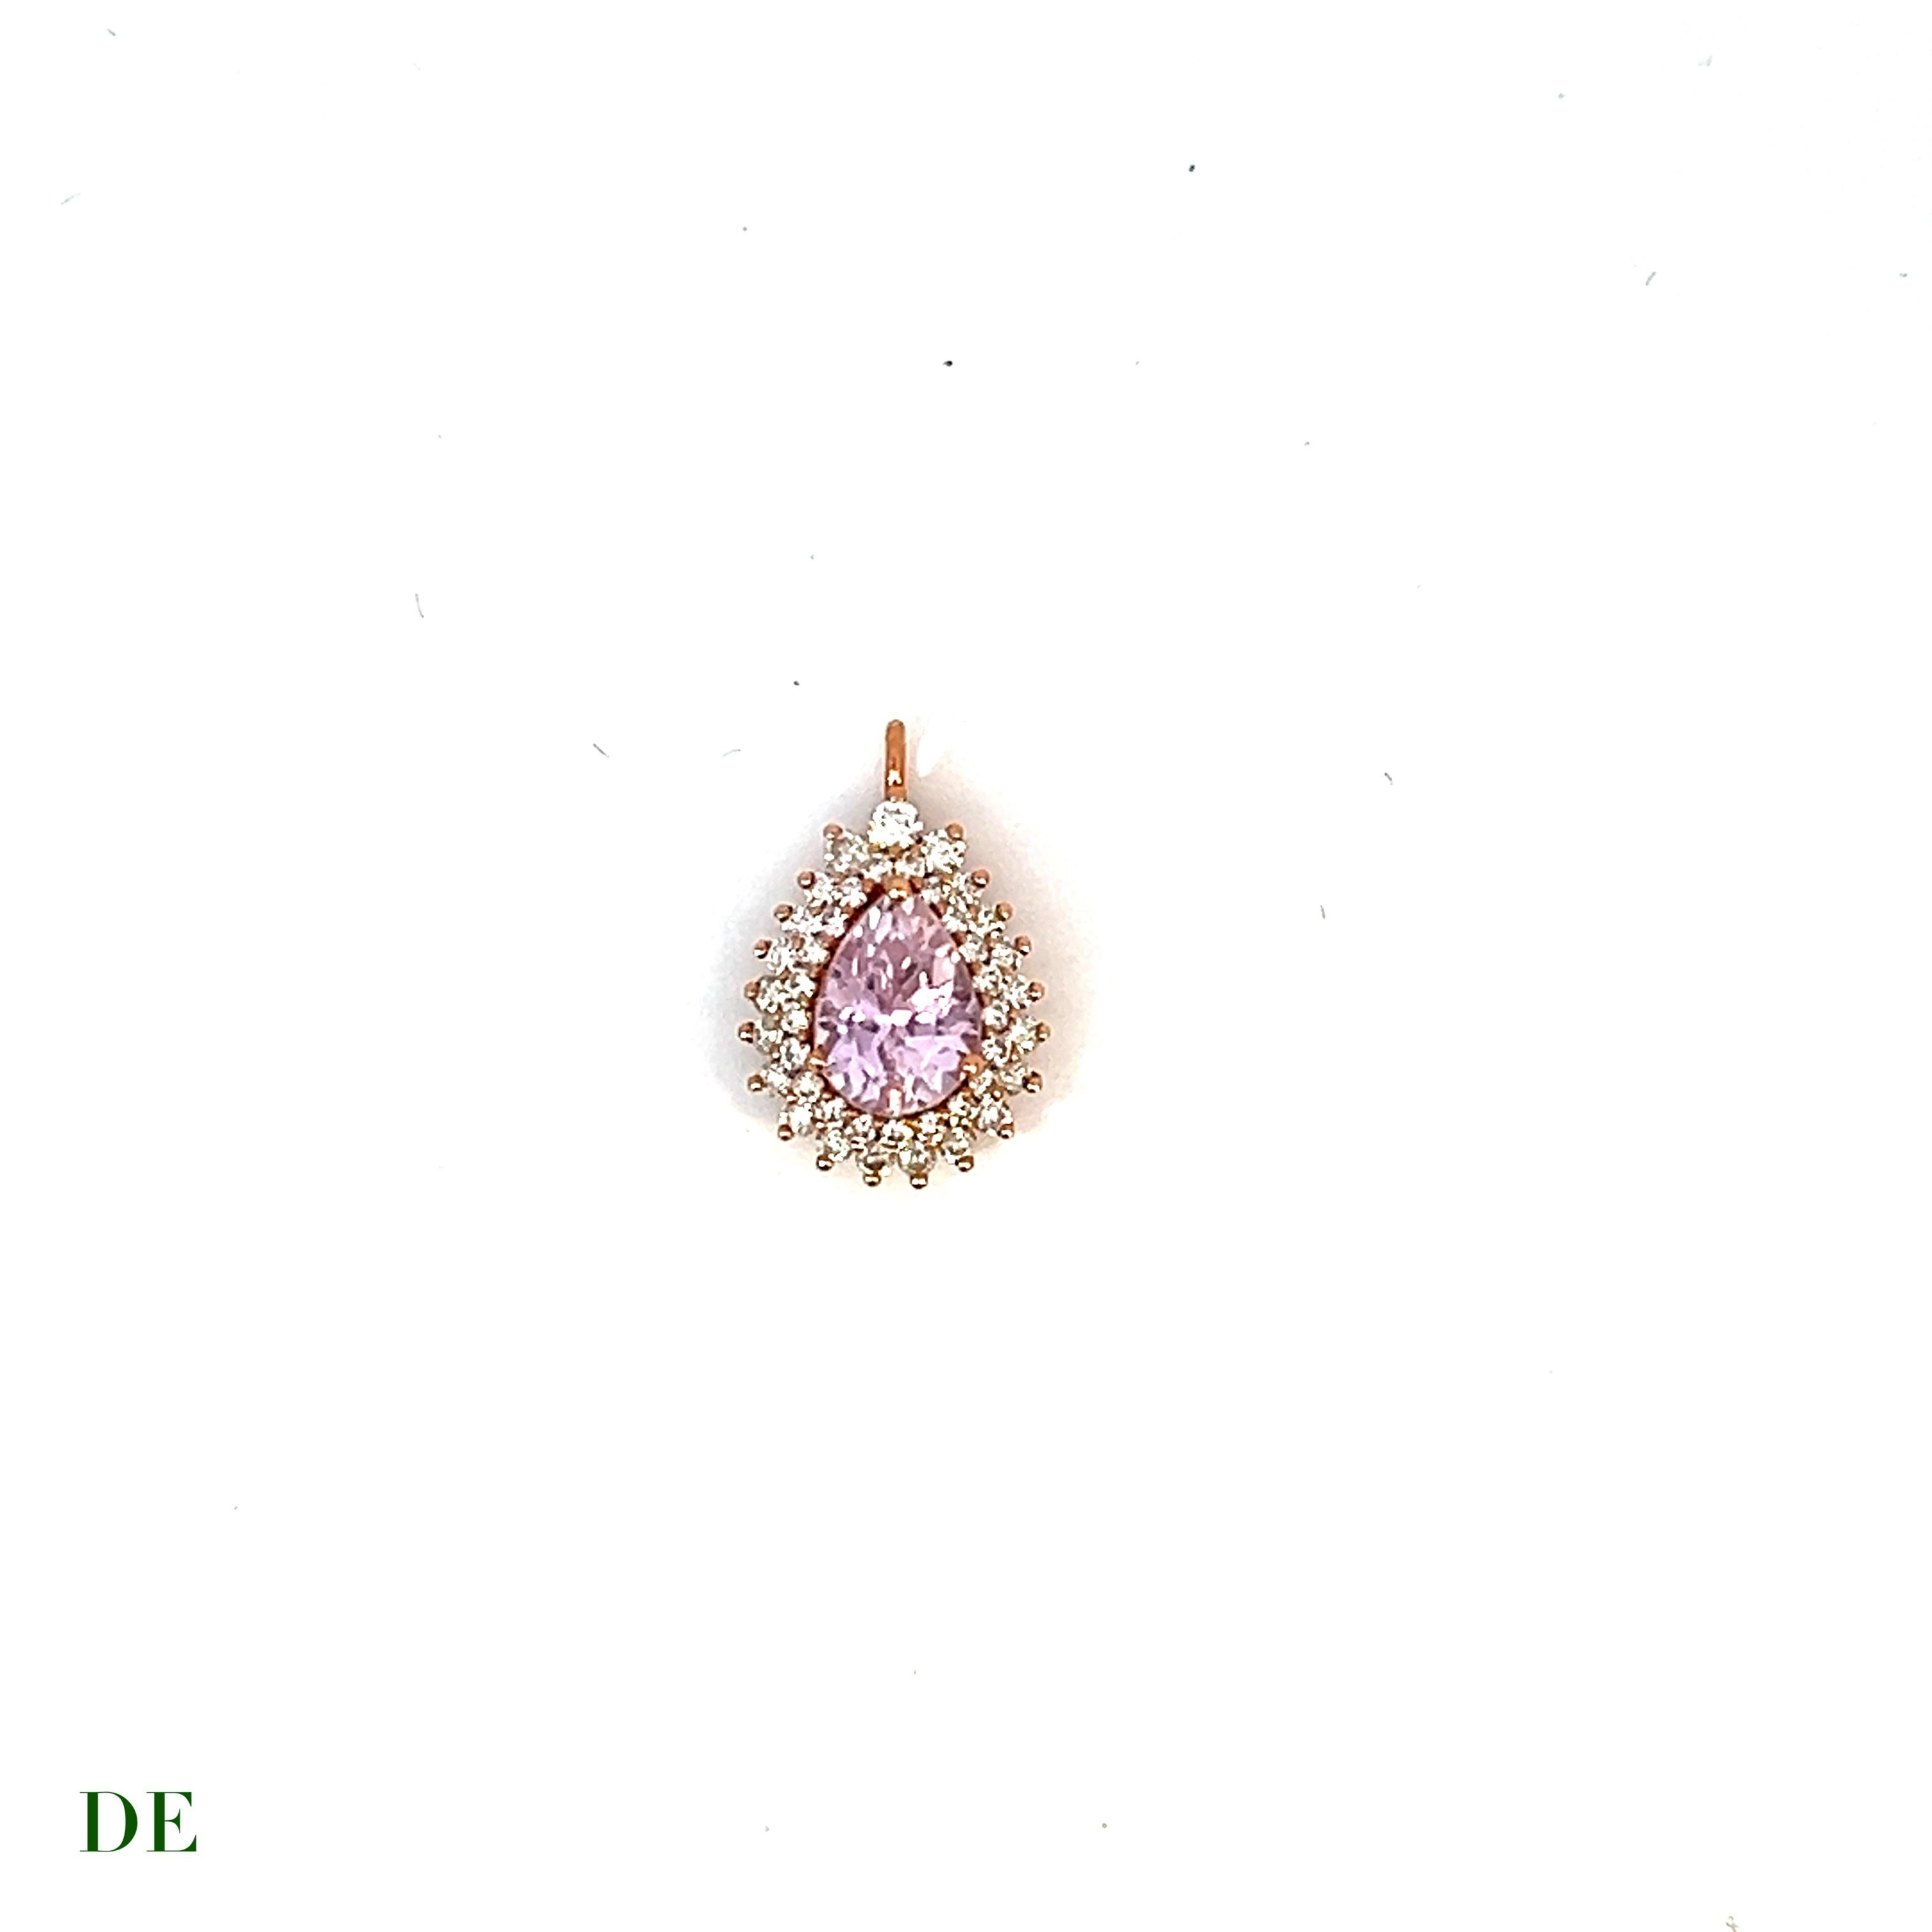 Introducing the epitome of elegance and sophistication - the Elegance 14k Timeless Classic Barbie Vivid Pink Pendant. This exquisite pendant showcases a stunning 2.21 carat Kunzite gemstone in a vivid pink hue that radiates with captivating beauty.